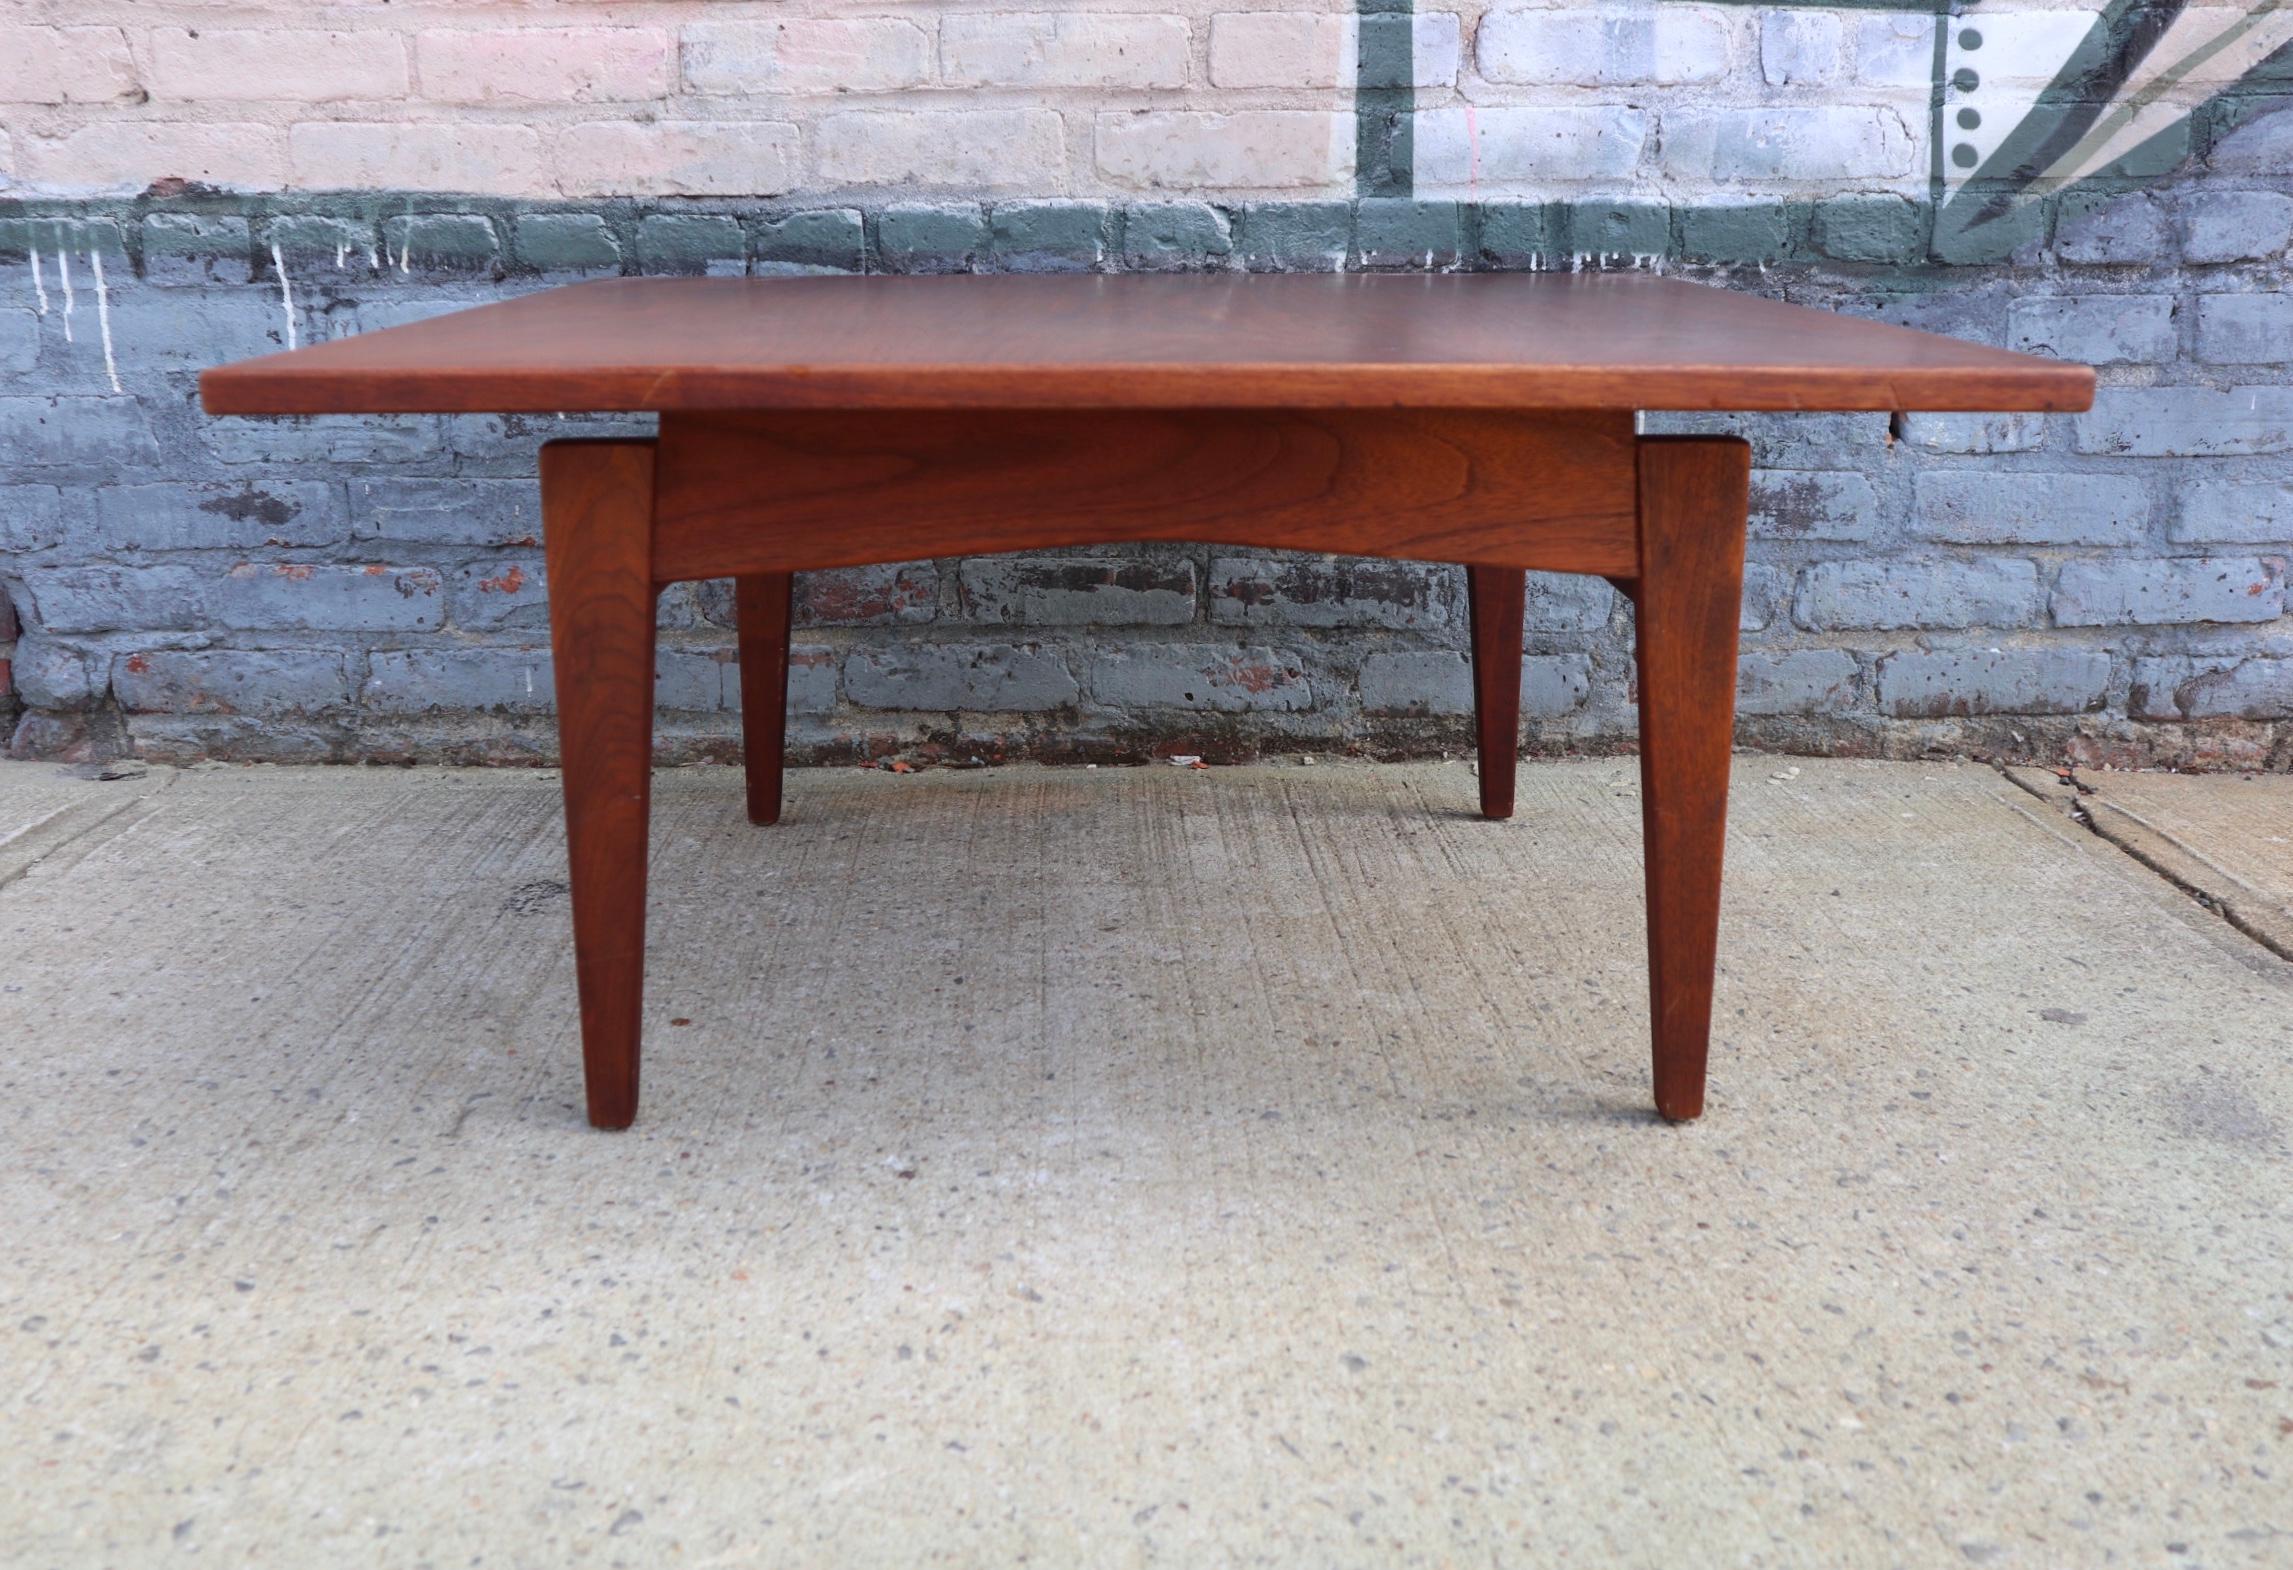 Gorgeous Jens Risom coffee table in walnut. Gorgeous deep walnut hues and grains. In very good condition.